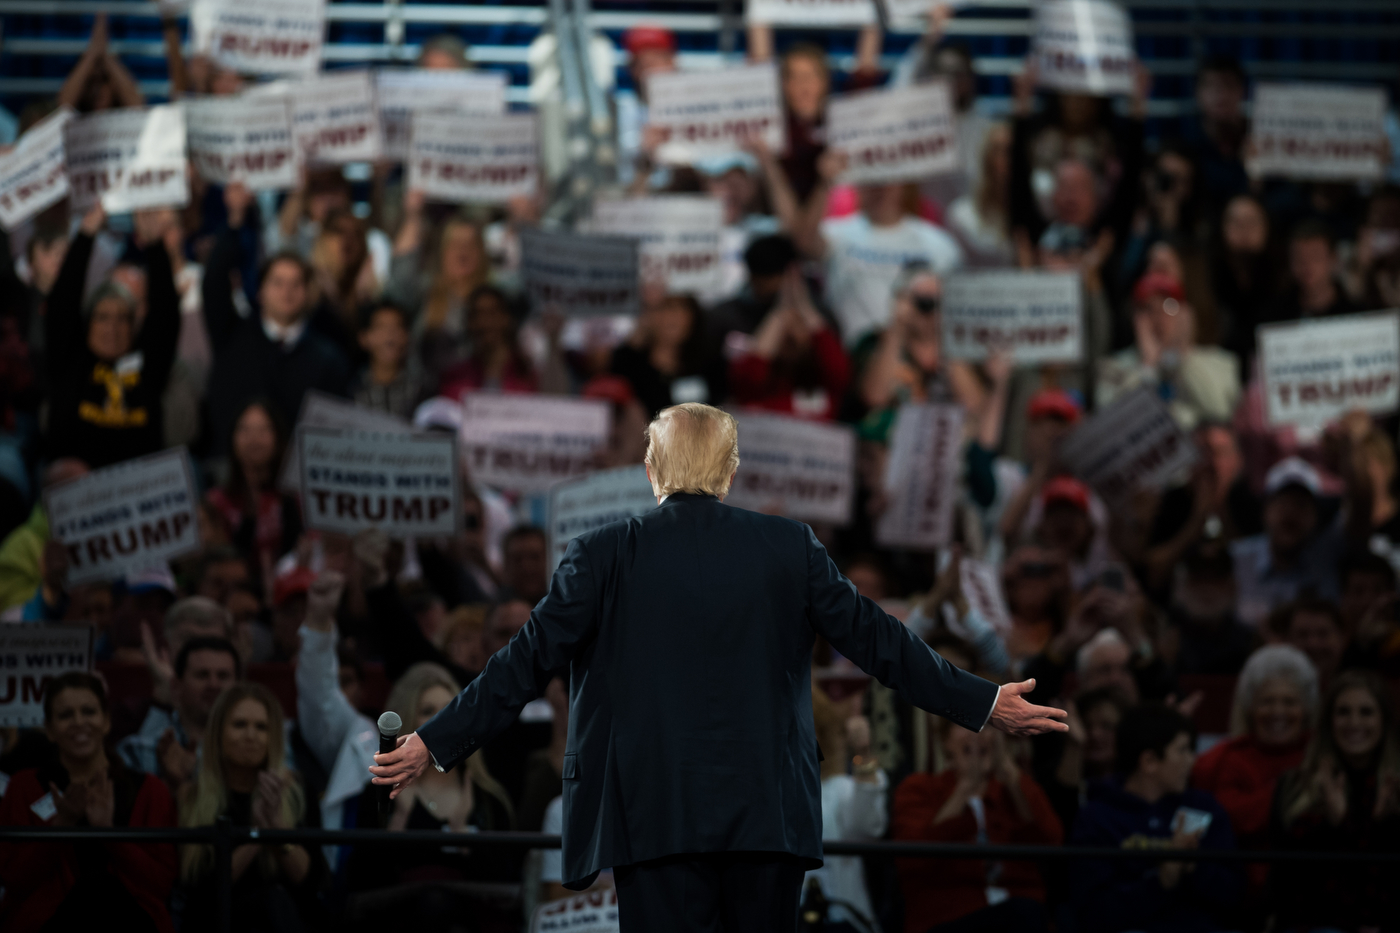  Republican U.S. presidential candidate Donald Trump turns to the crowd behind him during a campaign event in Des Moines, Iowa on Friday, Dec. 11, 2015. 